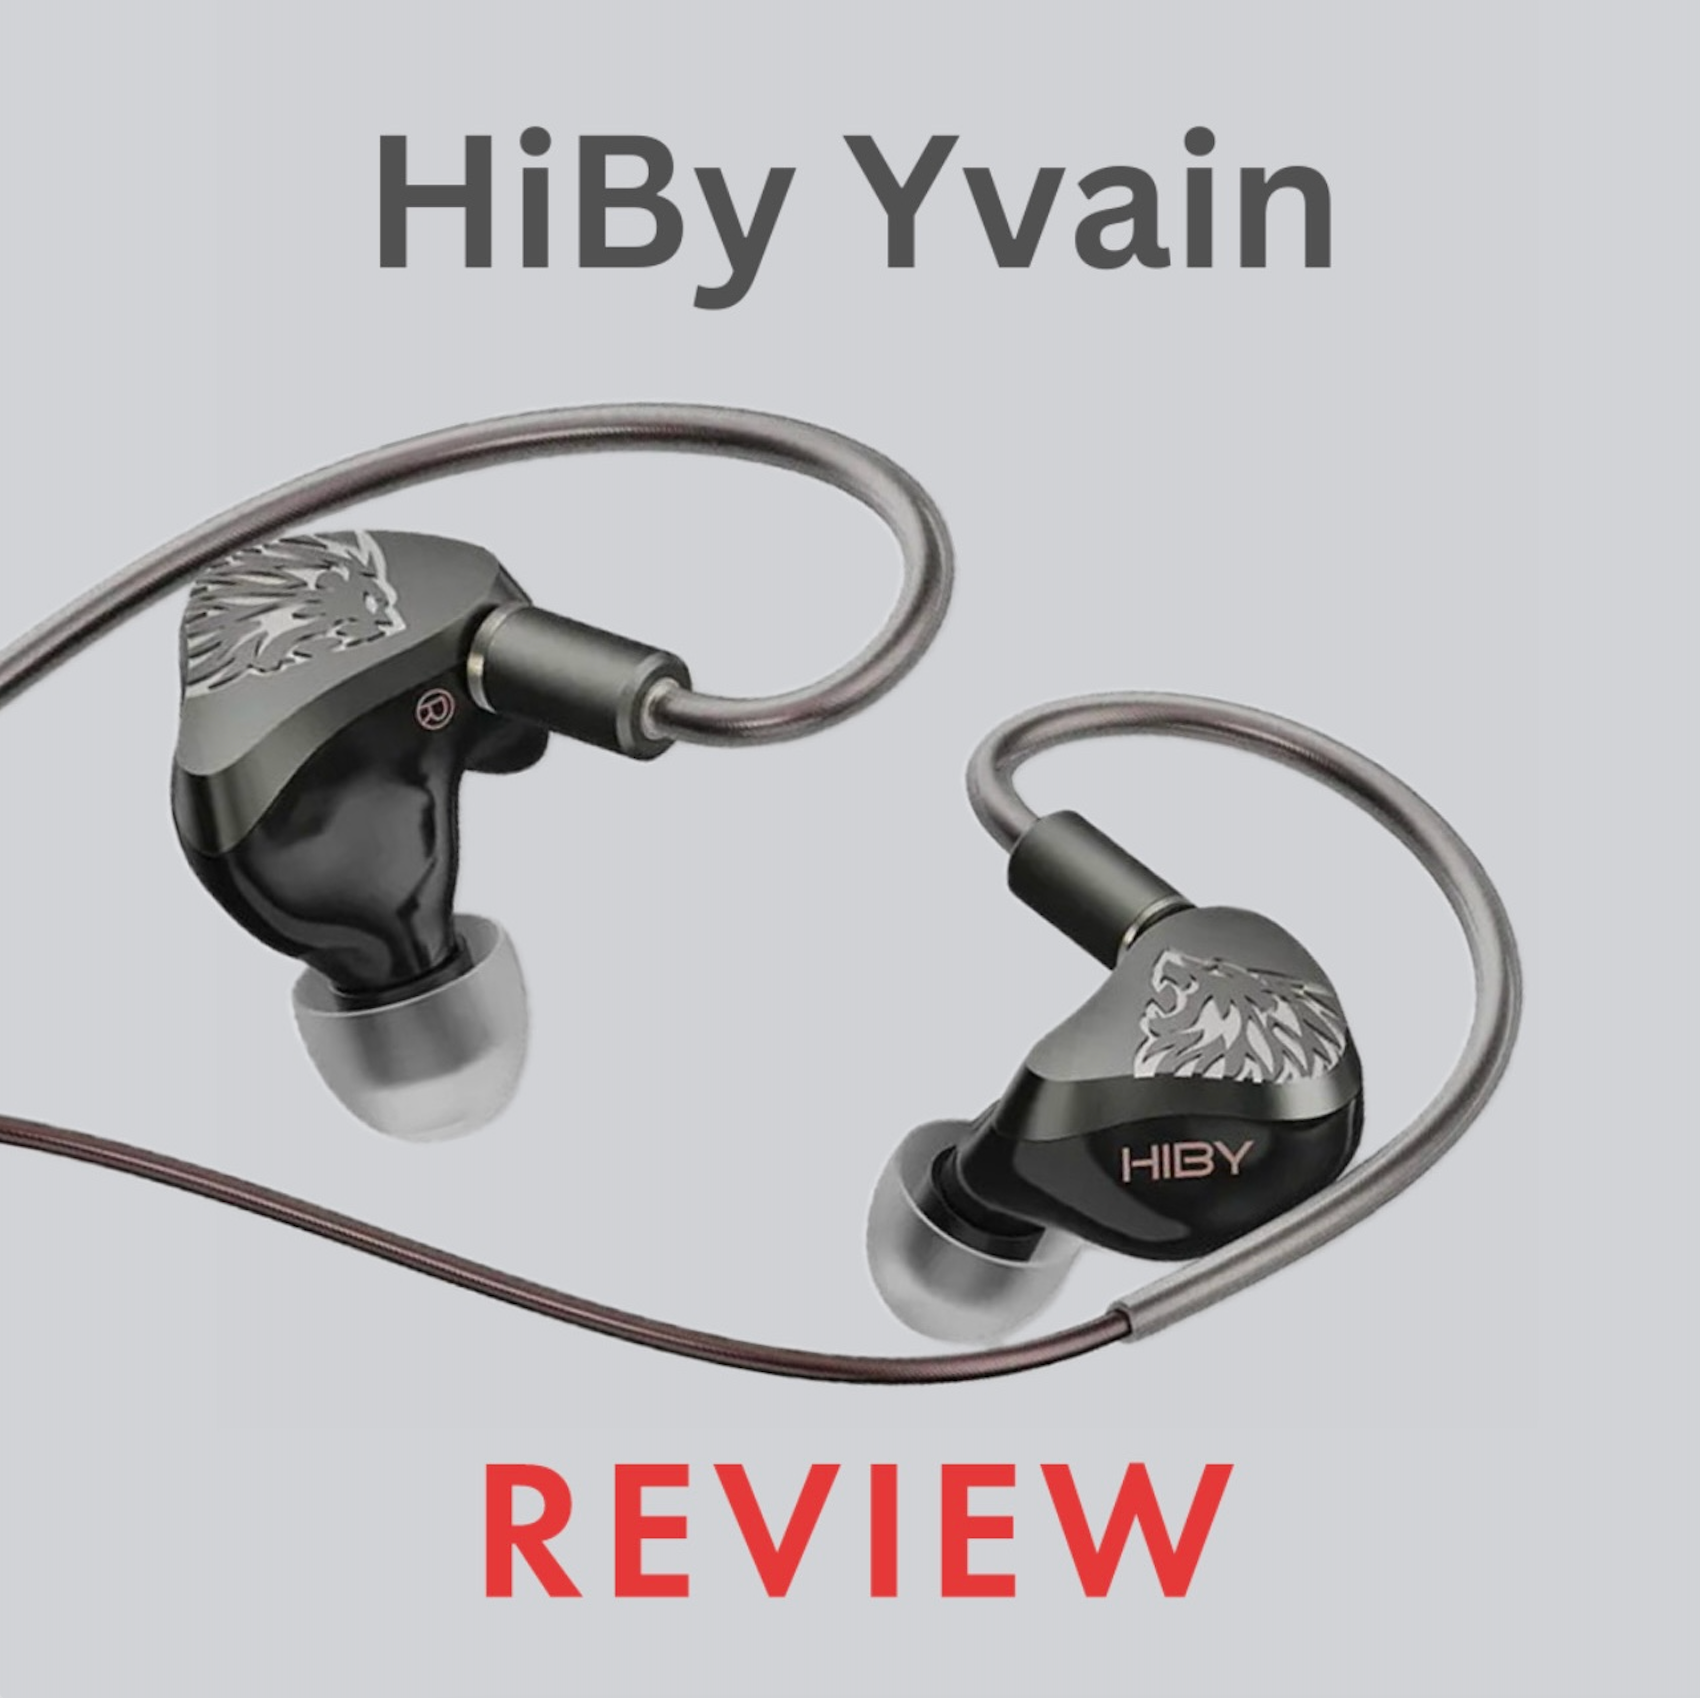 HiBy Yvain Review